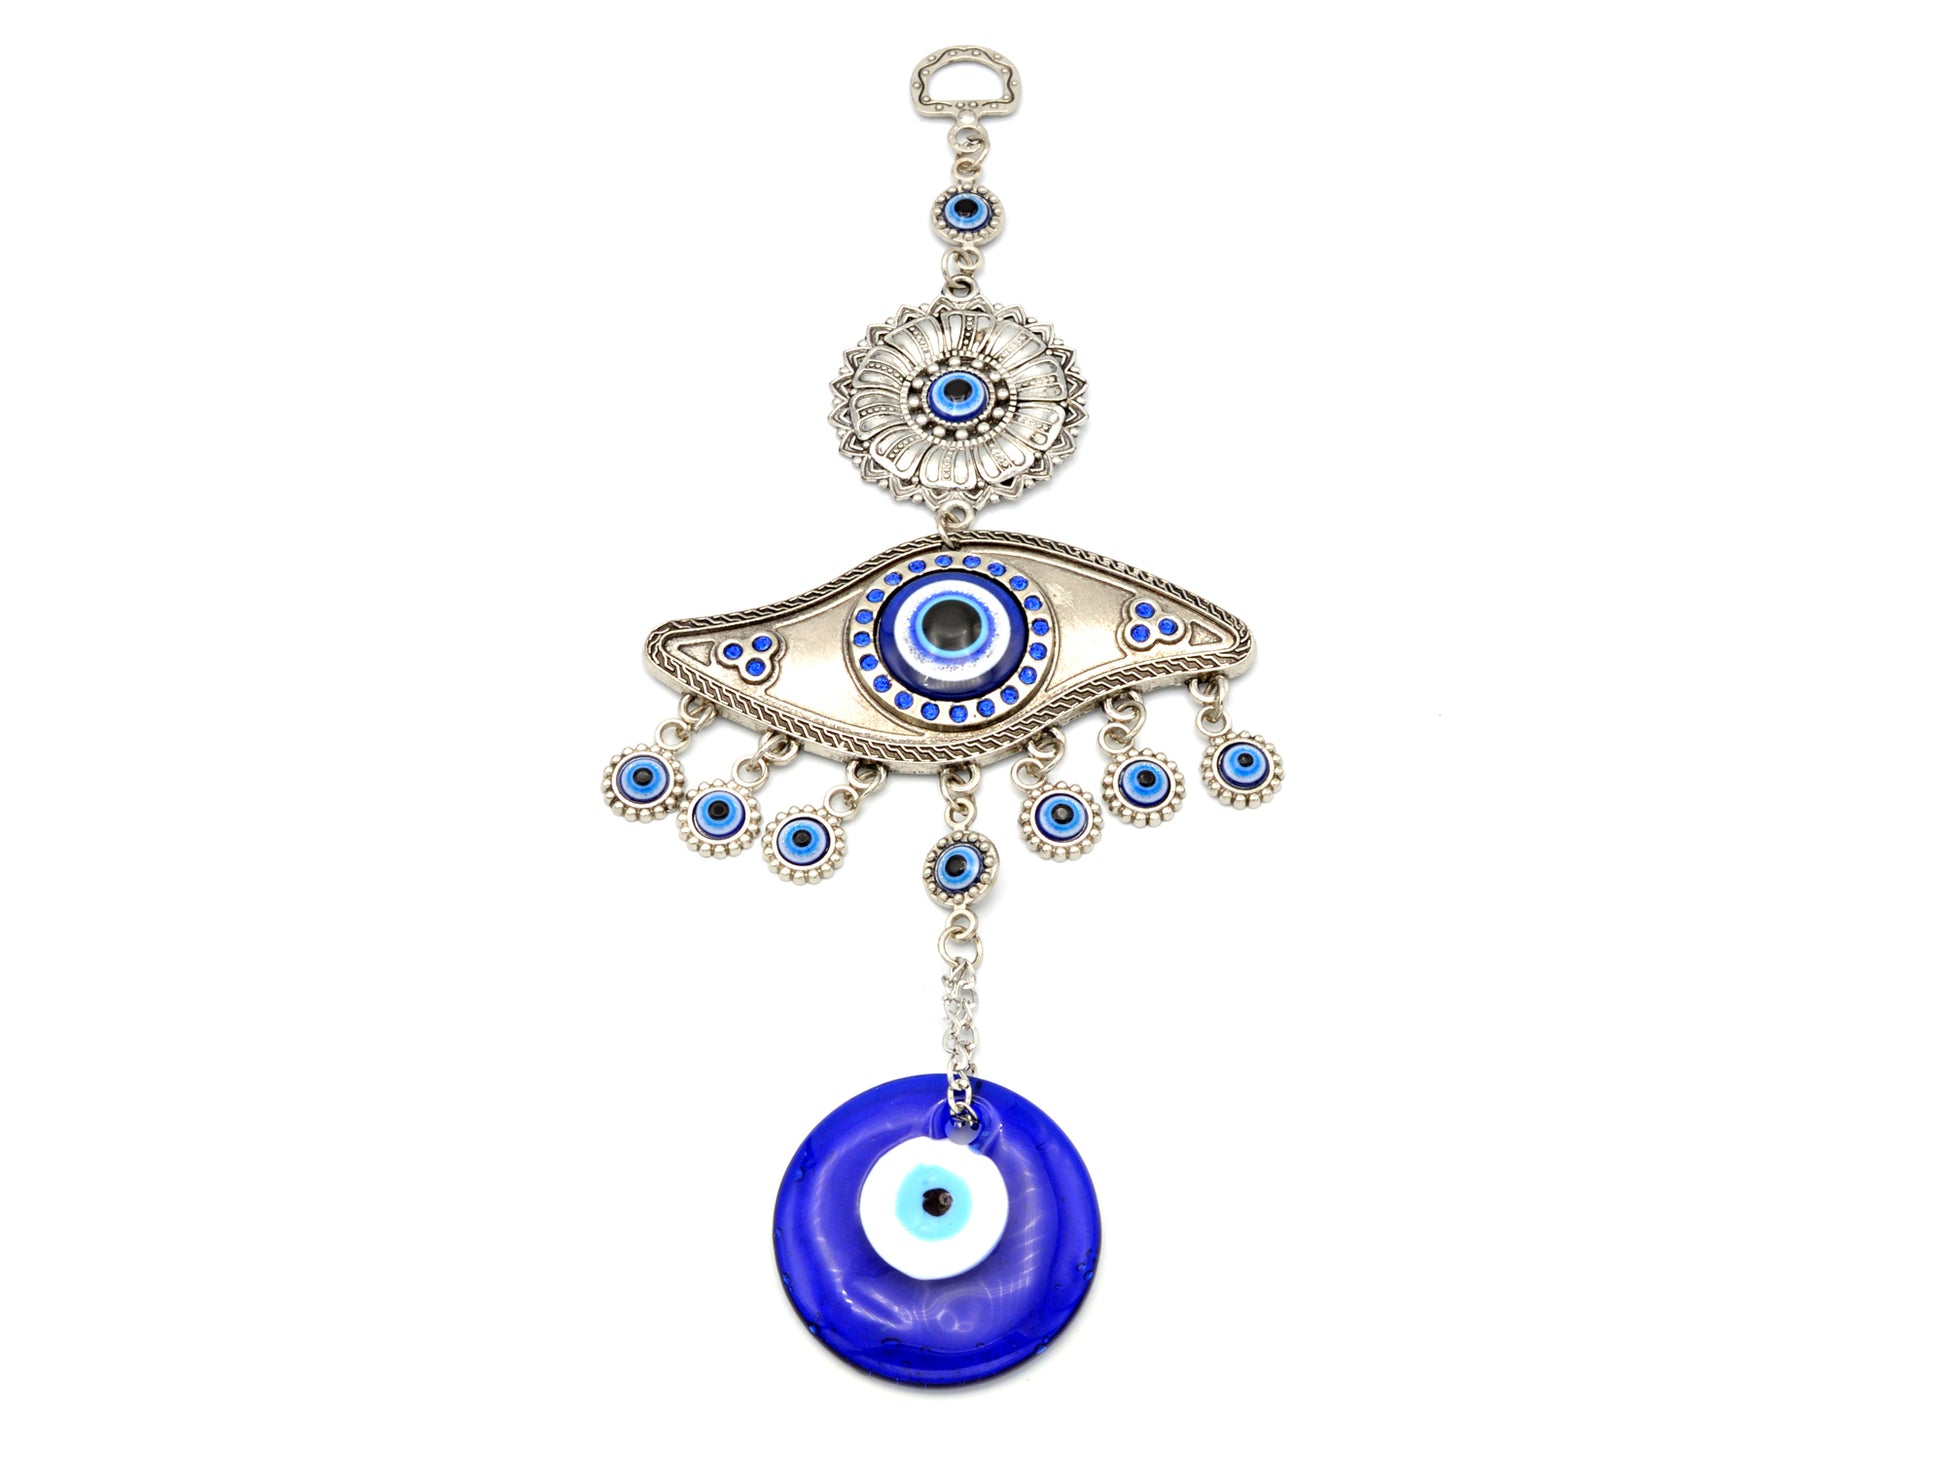 Blue Eyed Guardian Door Wall Hanger with Protective Hand and Evil Eye - BeadsFindingDepot